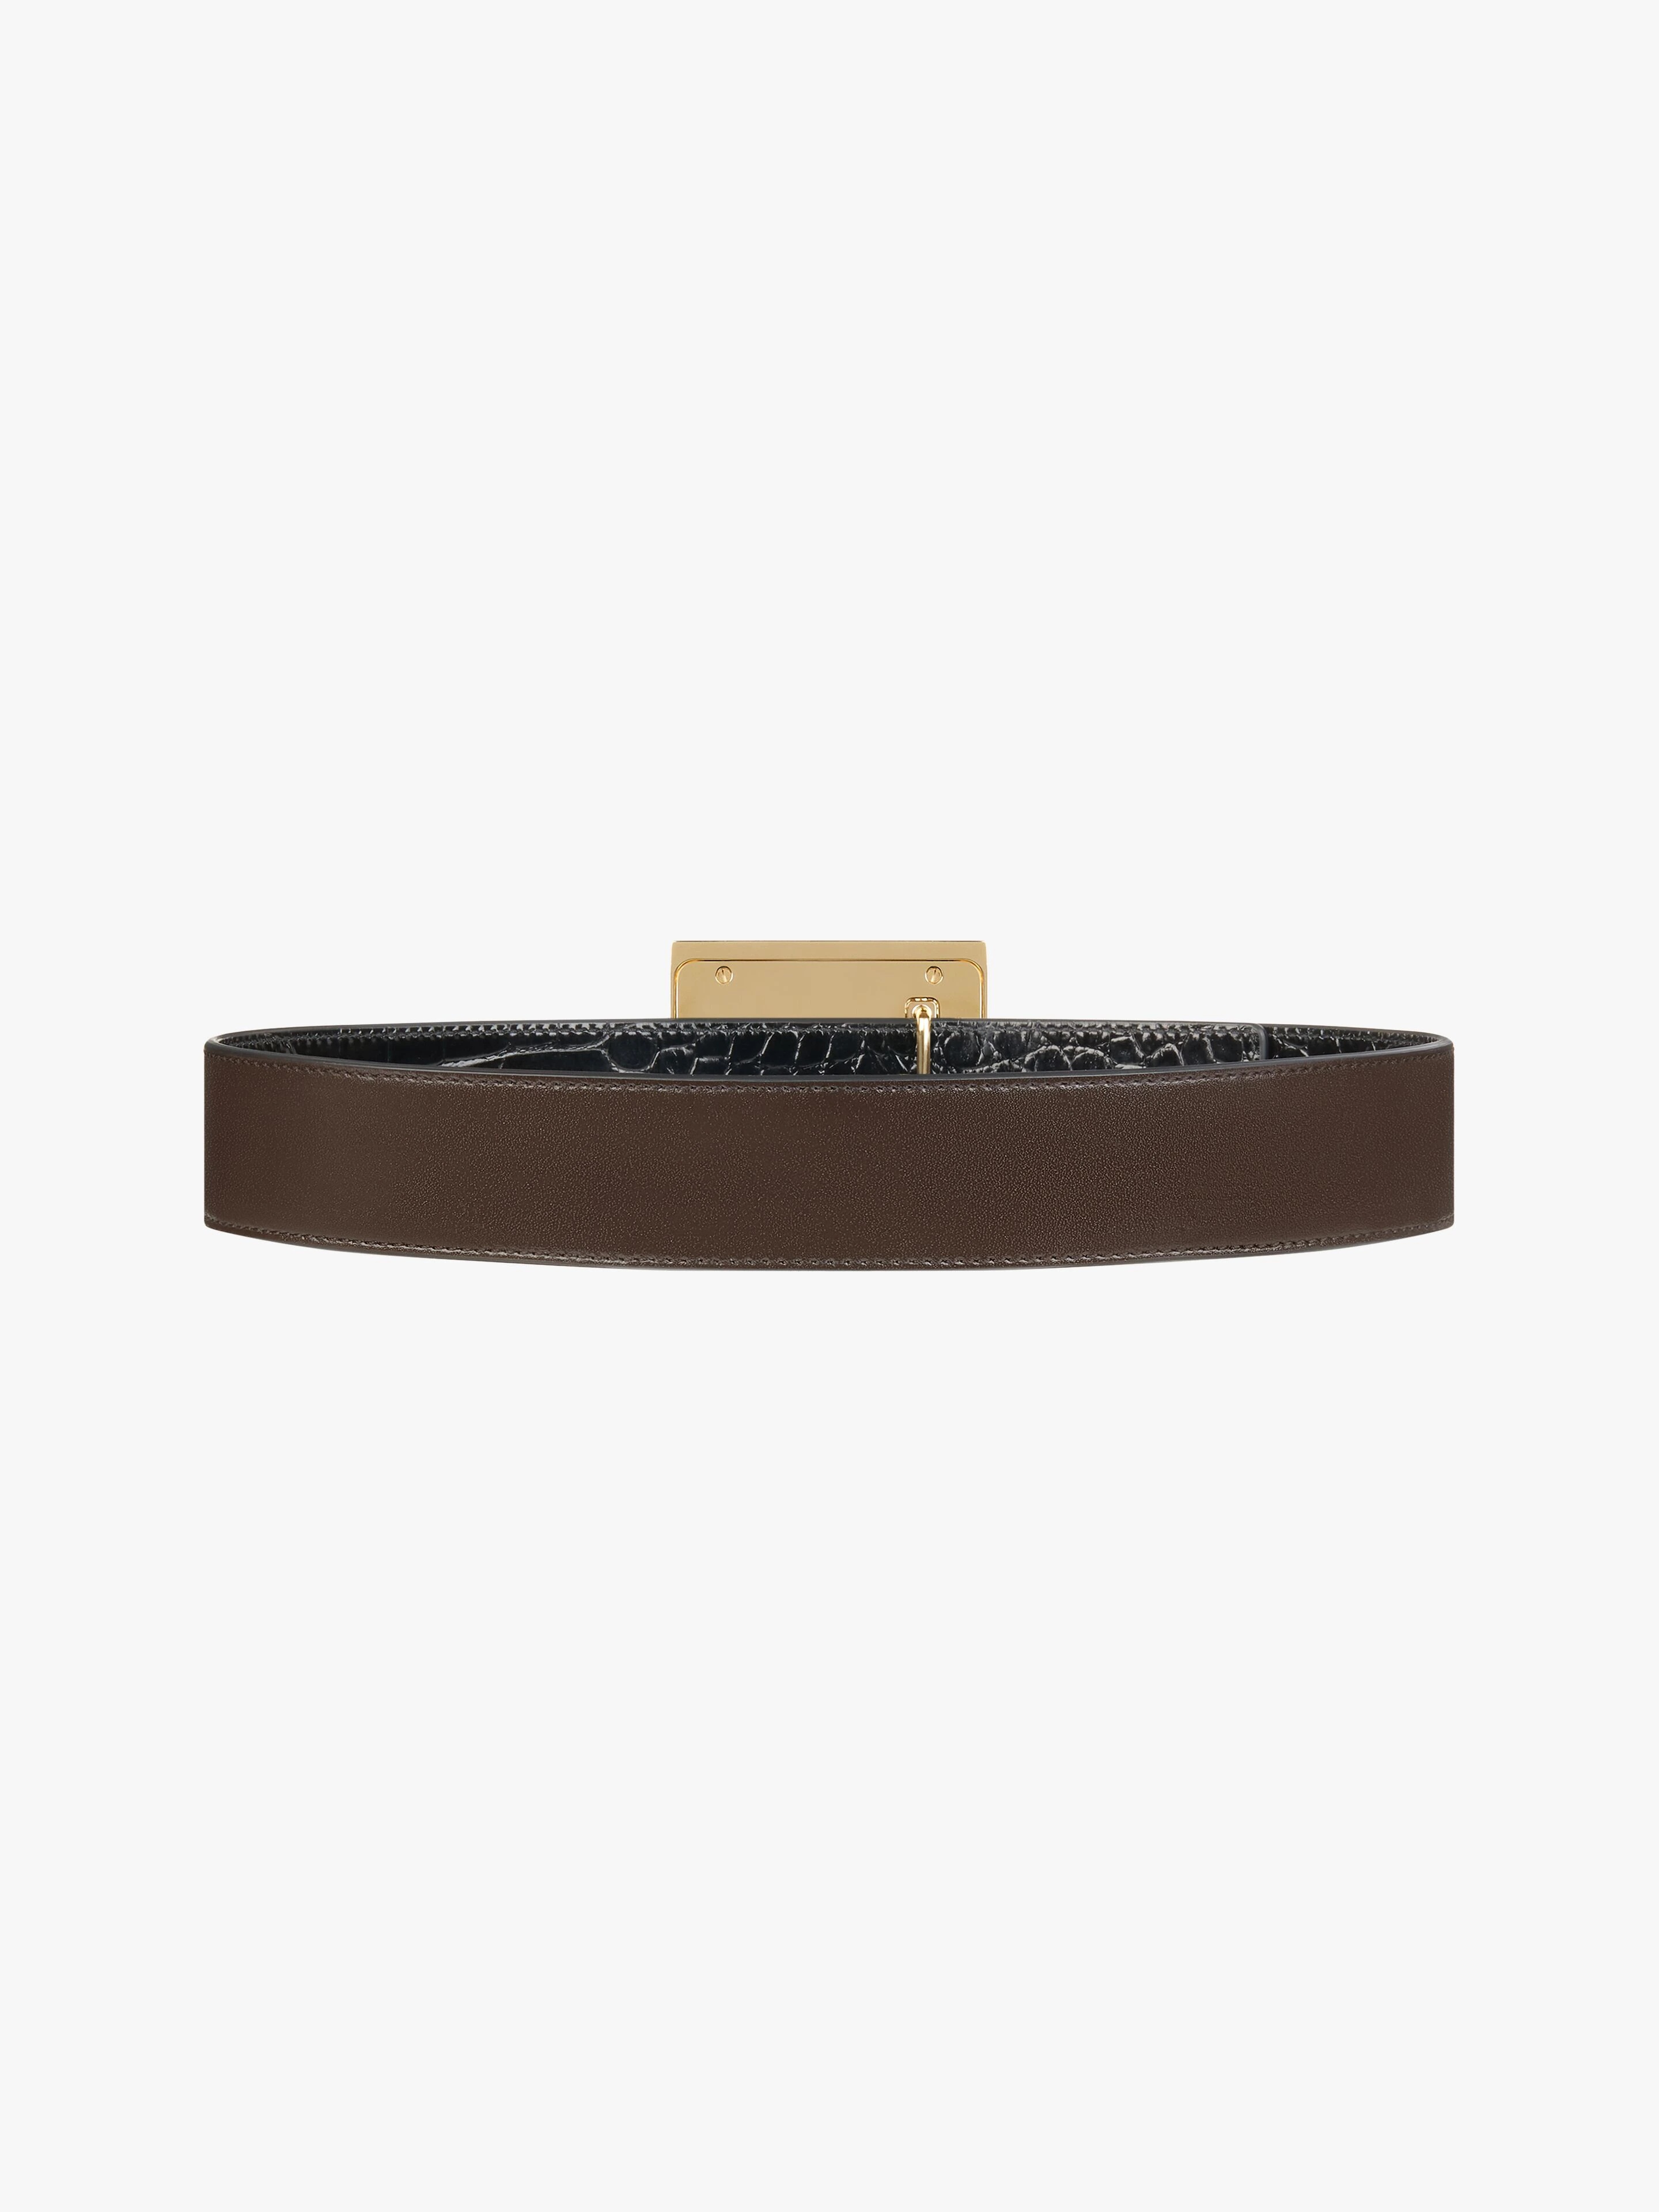 4G REVERSIBLE BELT IN LEATHER - 6